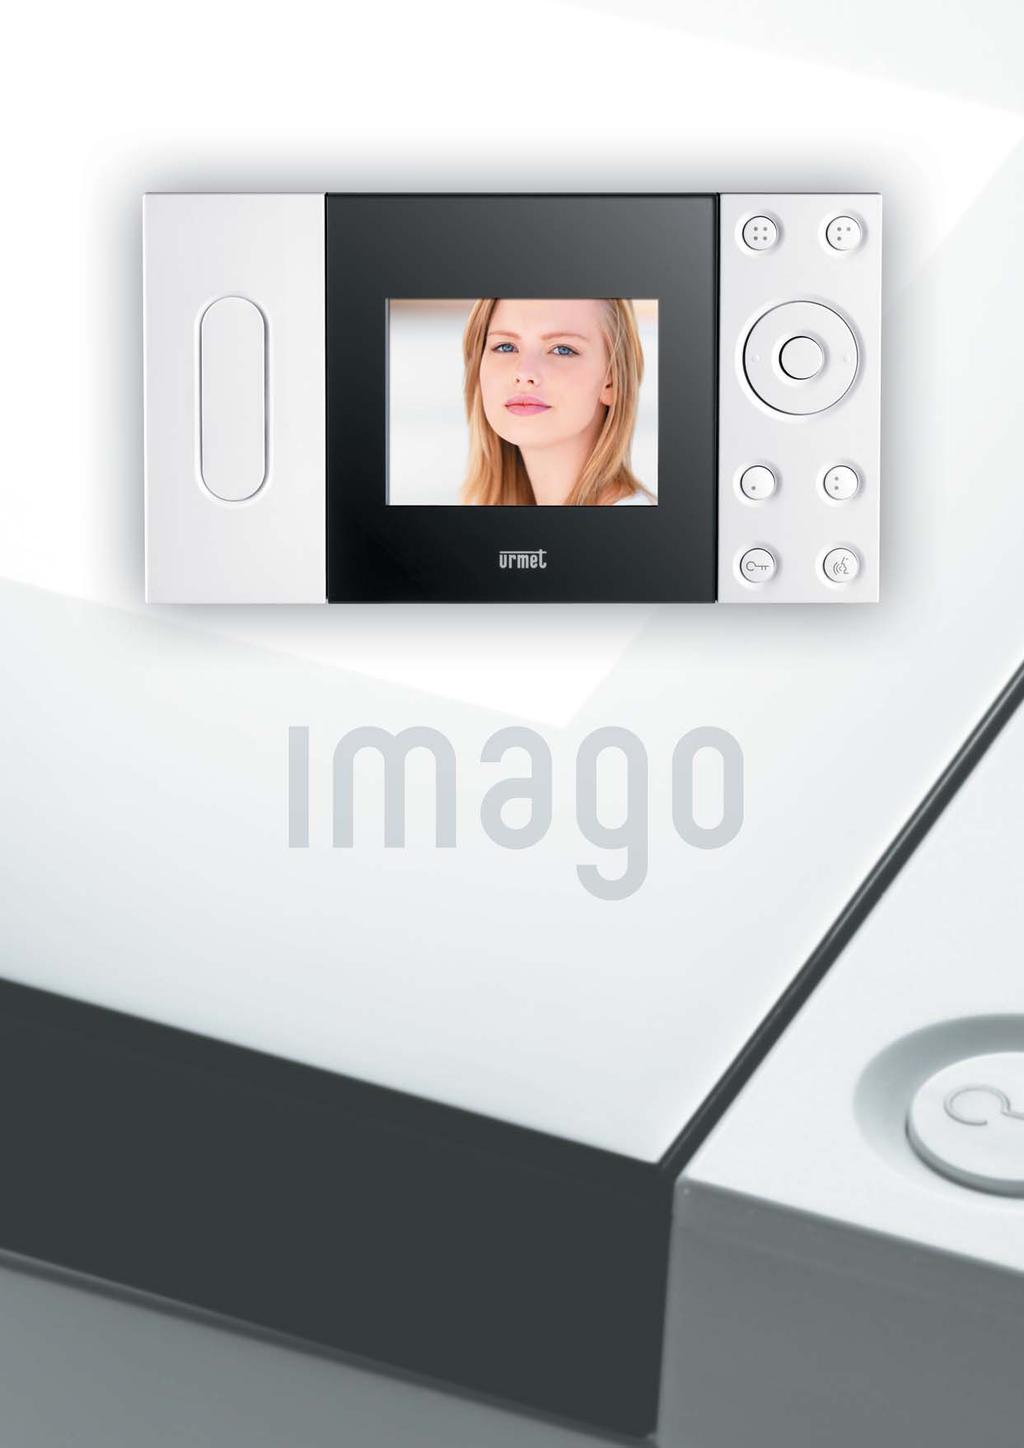 Imago: give way to image, to a look that makes a design and technology